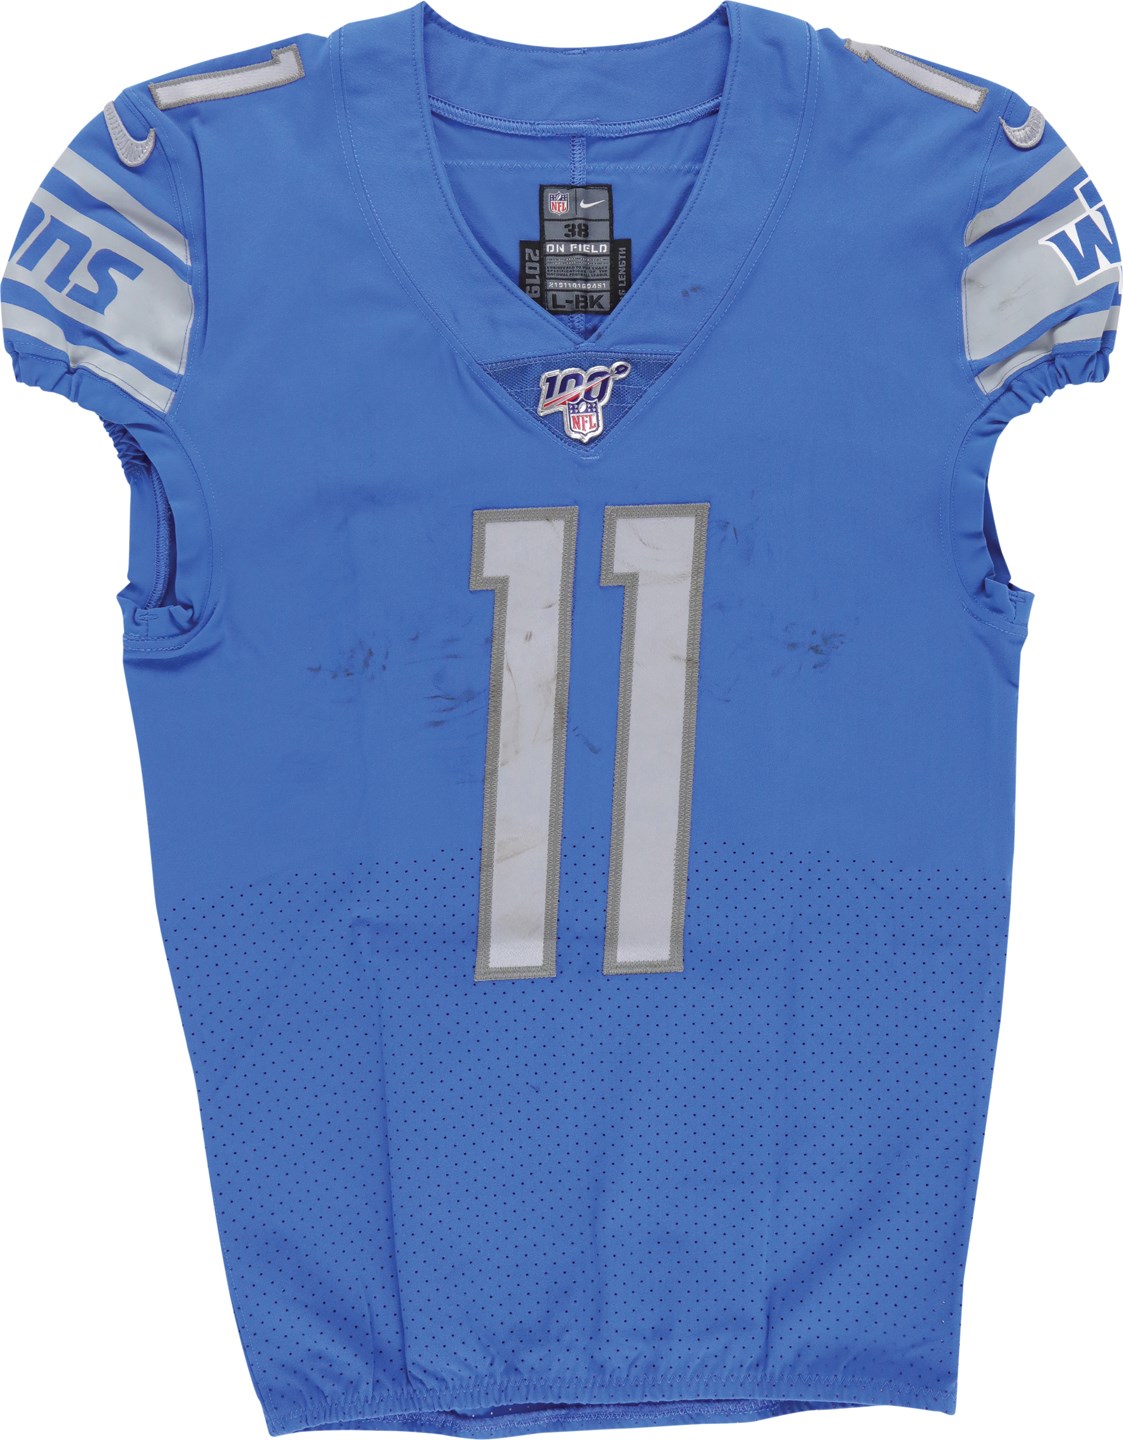 Football - 9/15/19 Marvin Jones Jr. Unwashed Detroit Lions Game Worn Jersey (Photo-Matched)